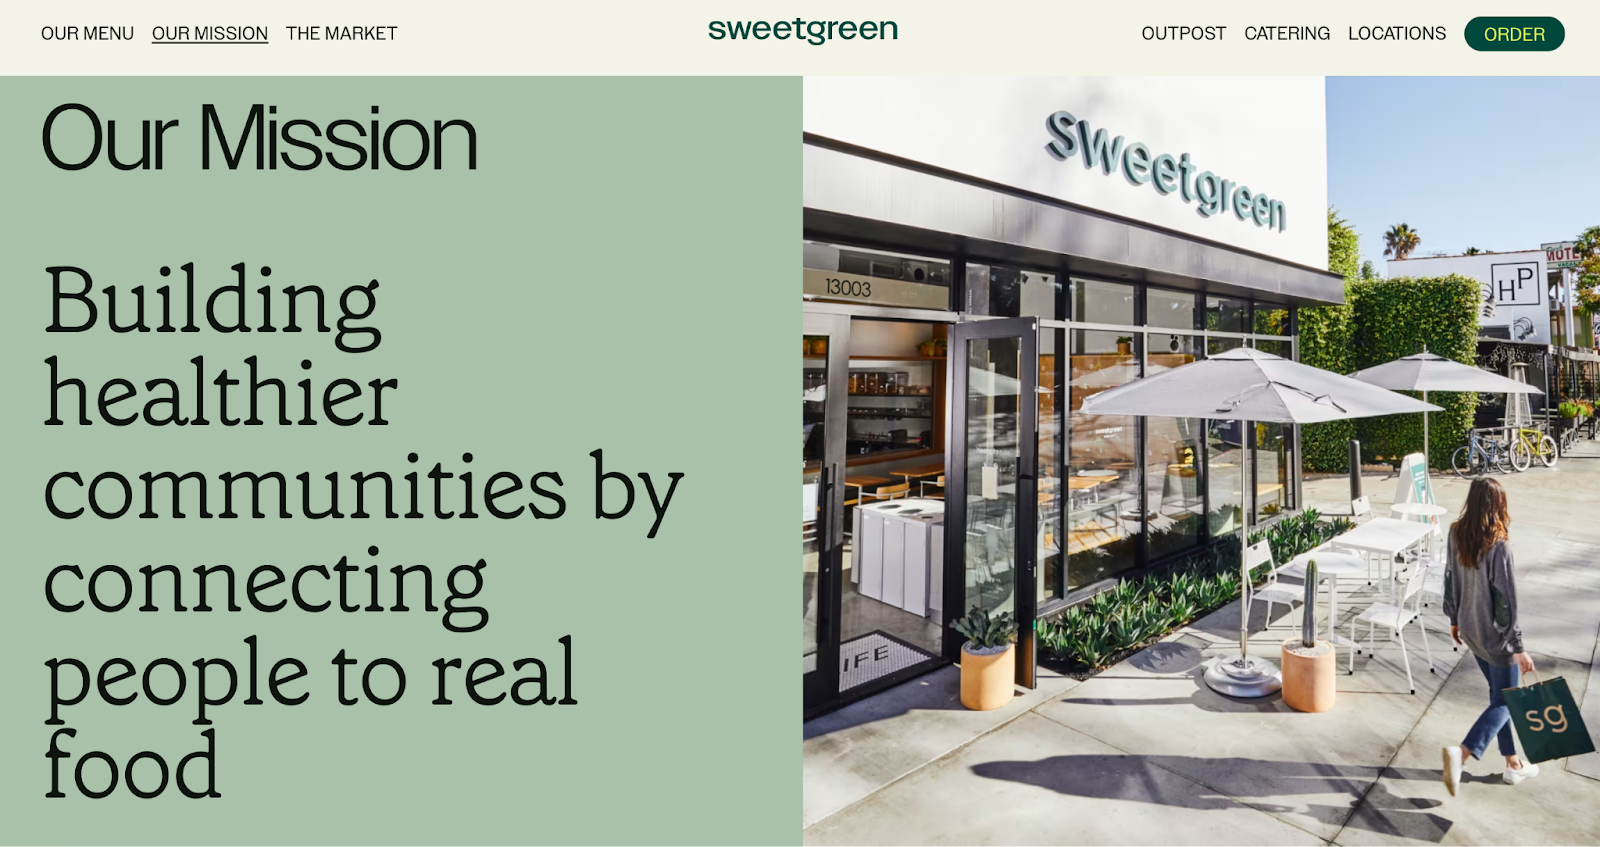 Company mission statement examples: sweetgreen